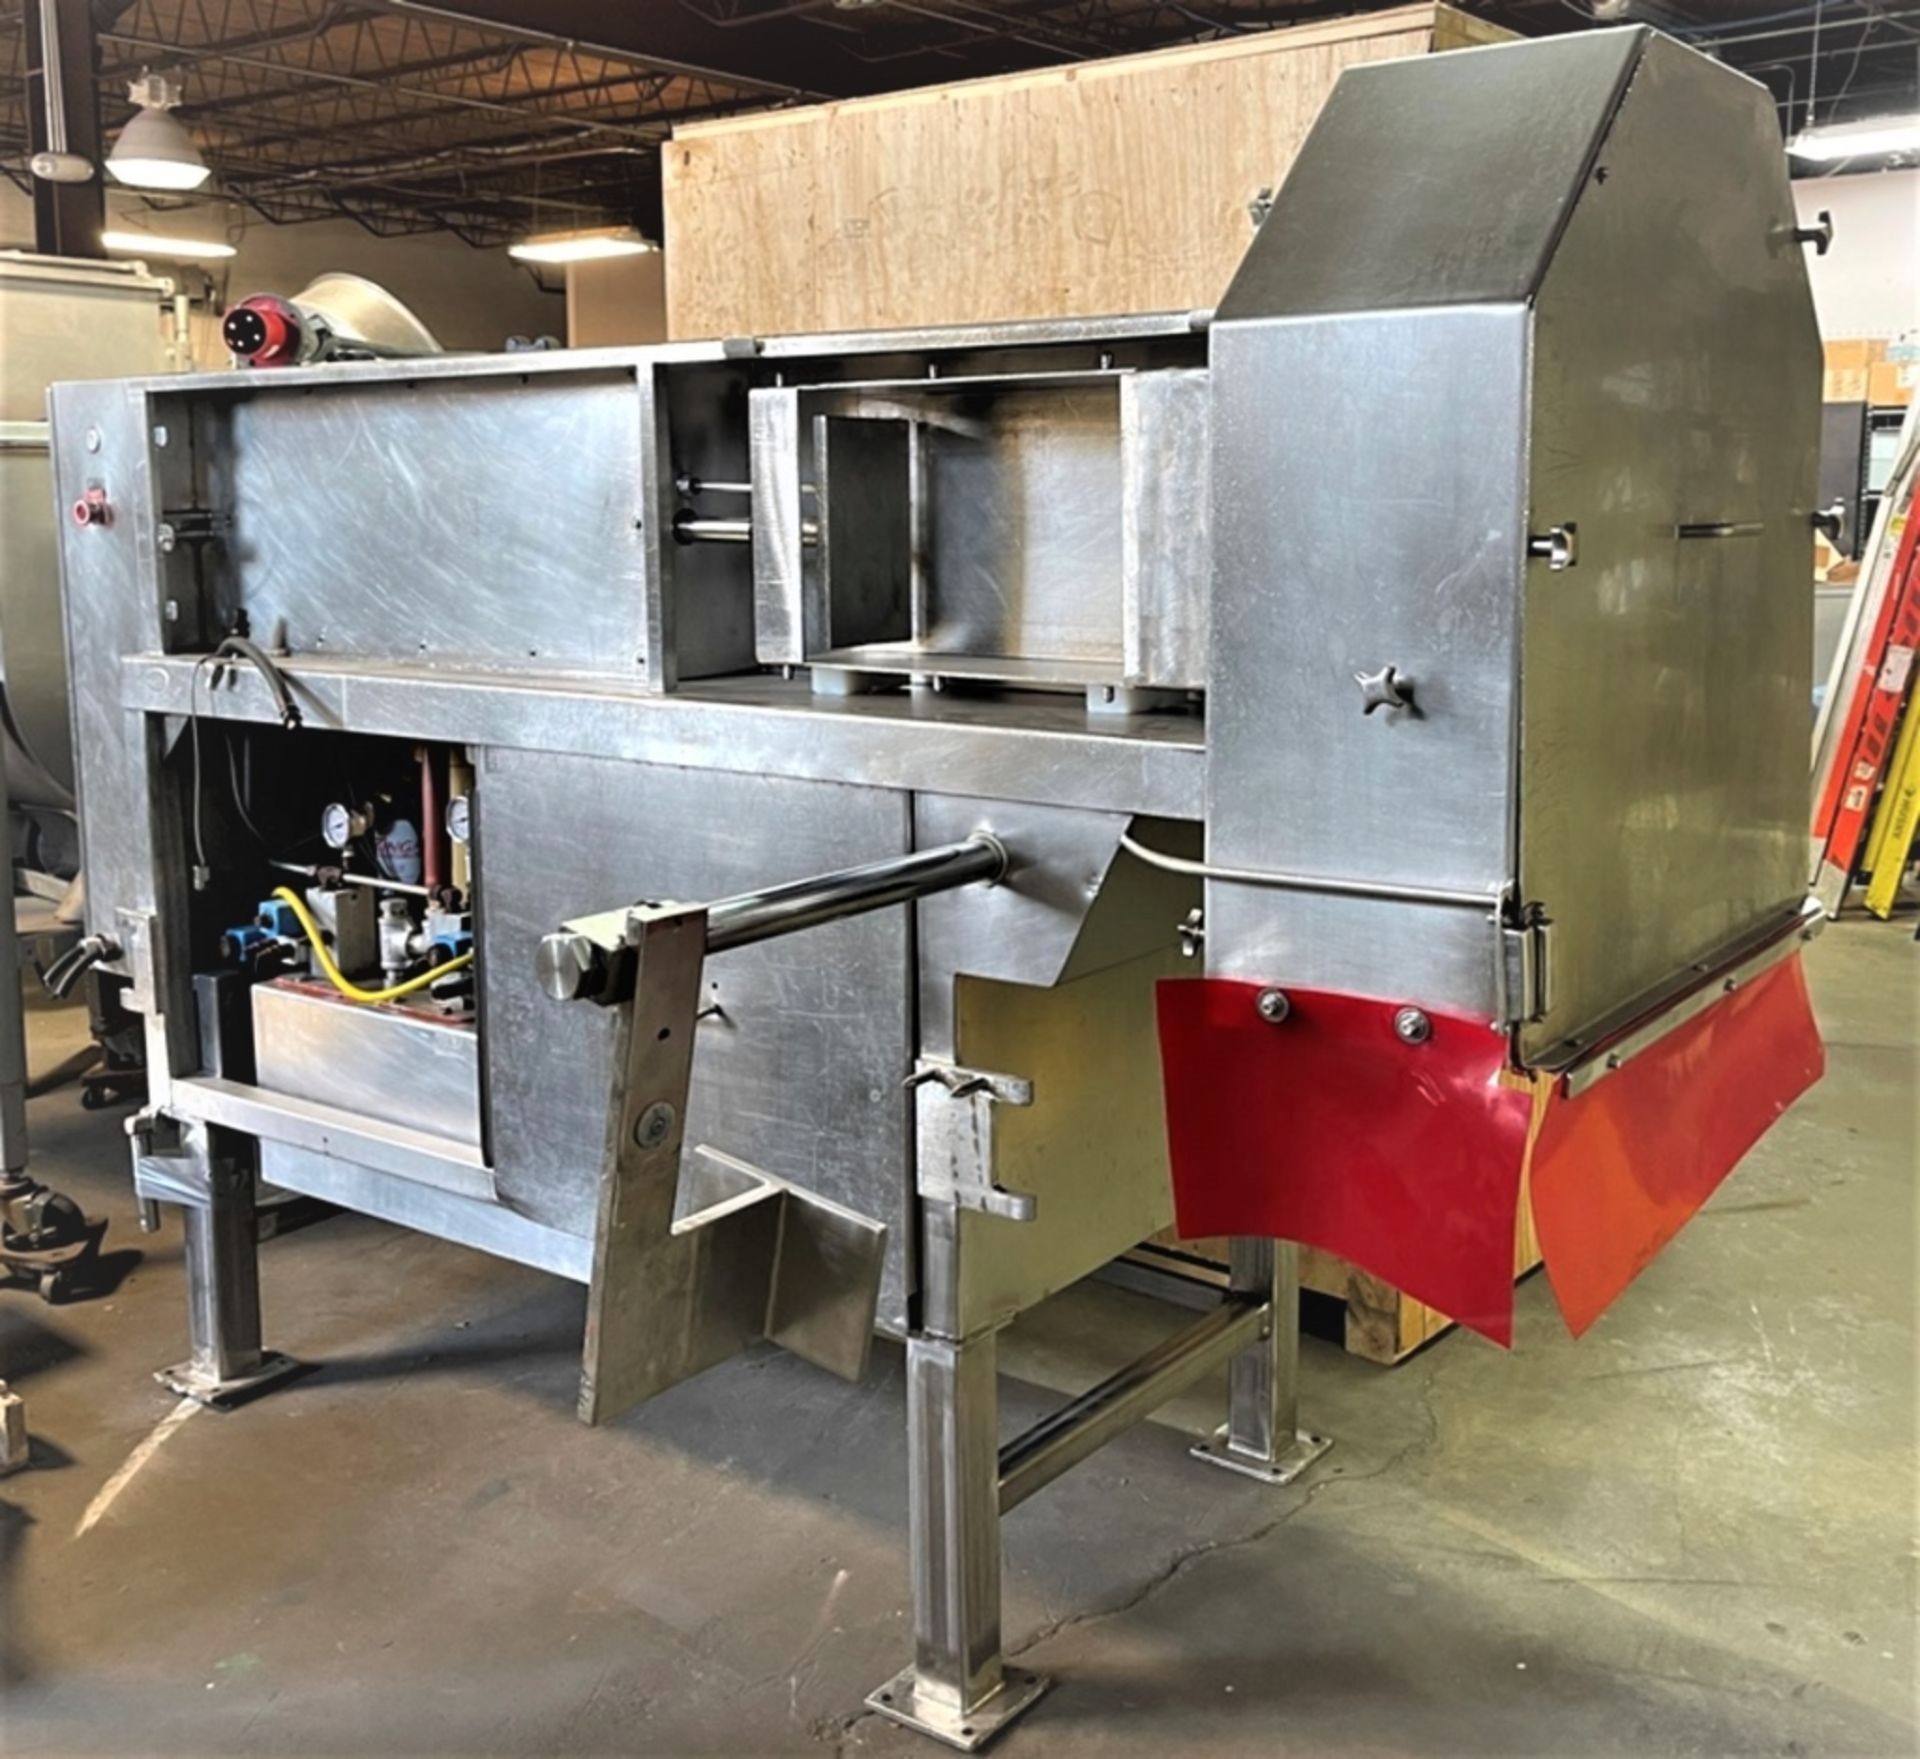 Johnson Cheese Shredder, Model 9600, All S/S Sanitary Construction, Dual Lane Feed to Handle Up to - Image 20 of 22